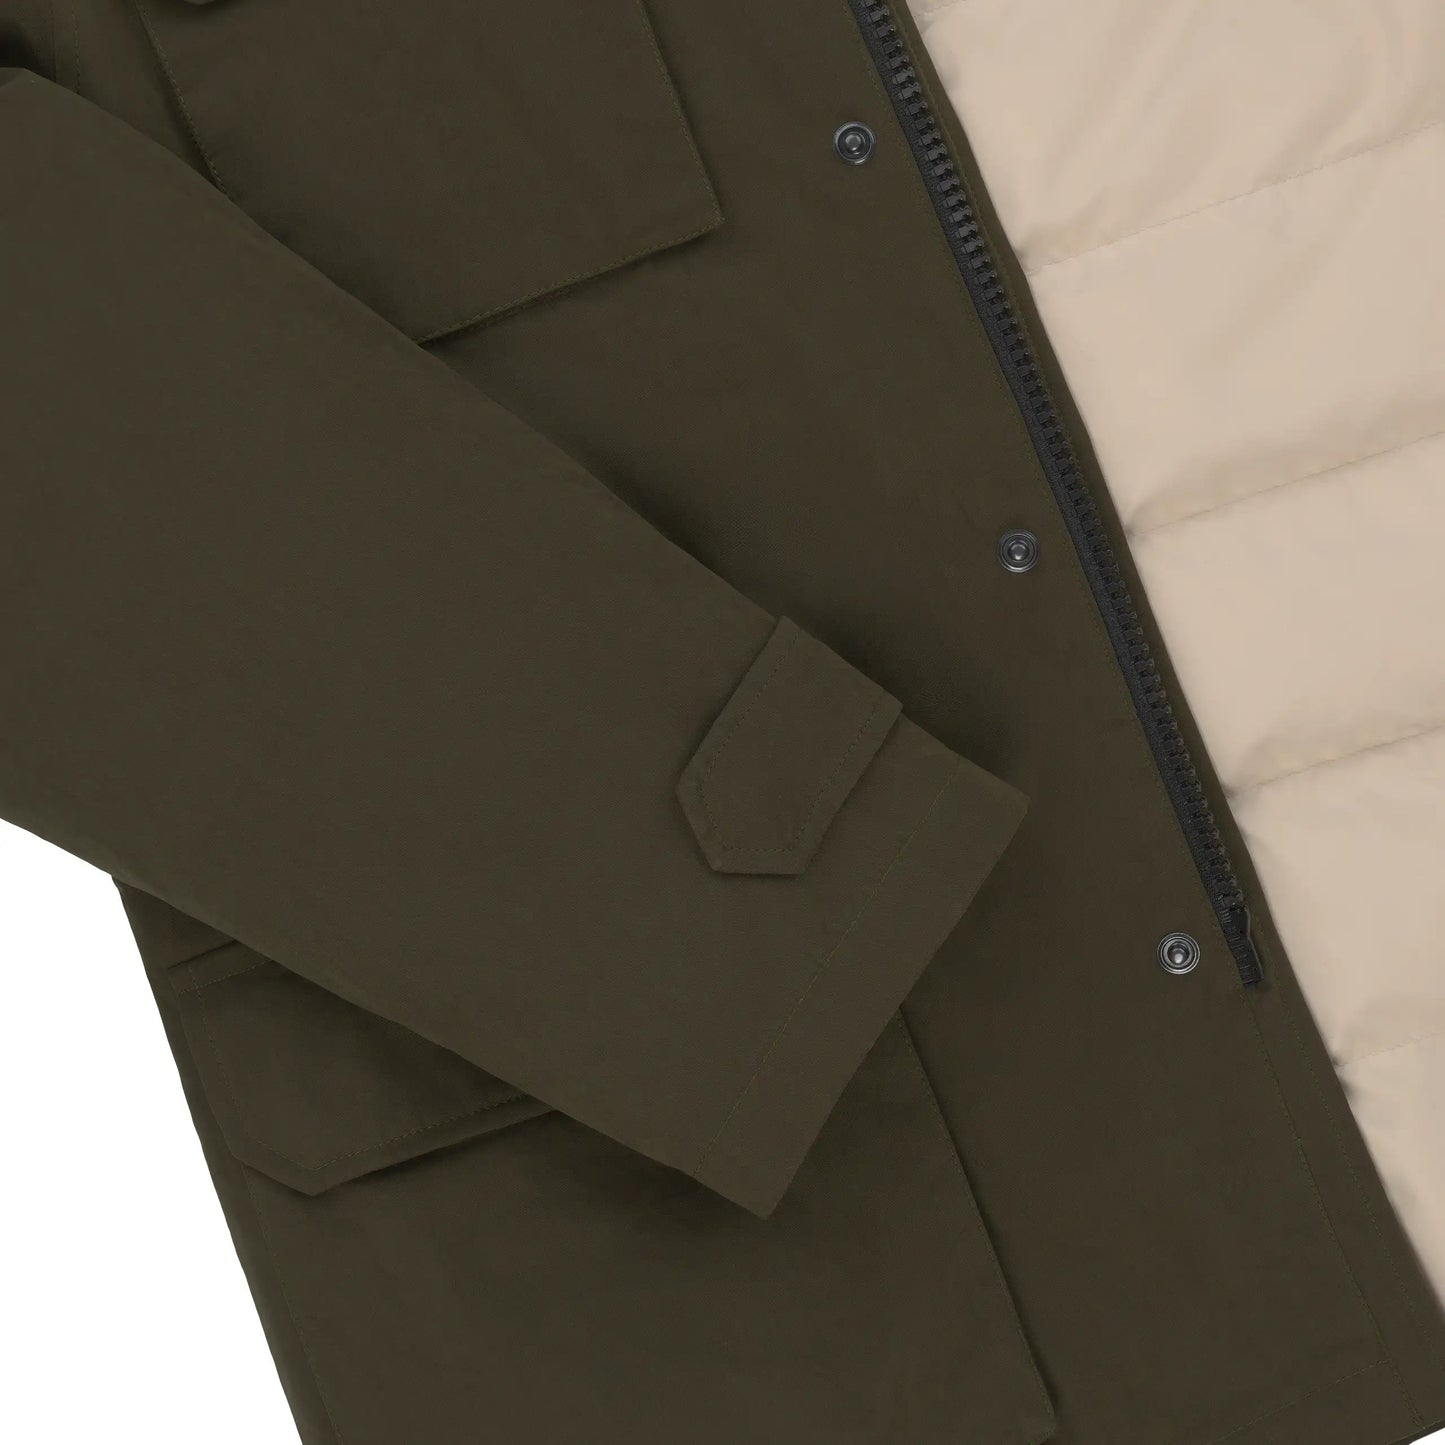 Sealup Hurricane Field Brushed Cotton Jacket in Military Green - SARTALE